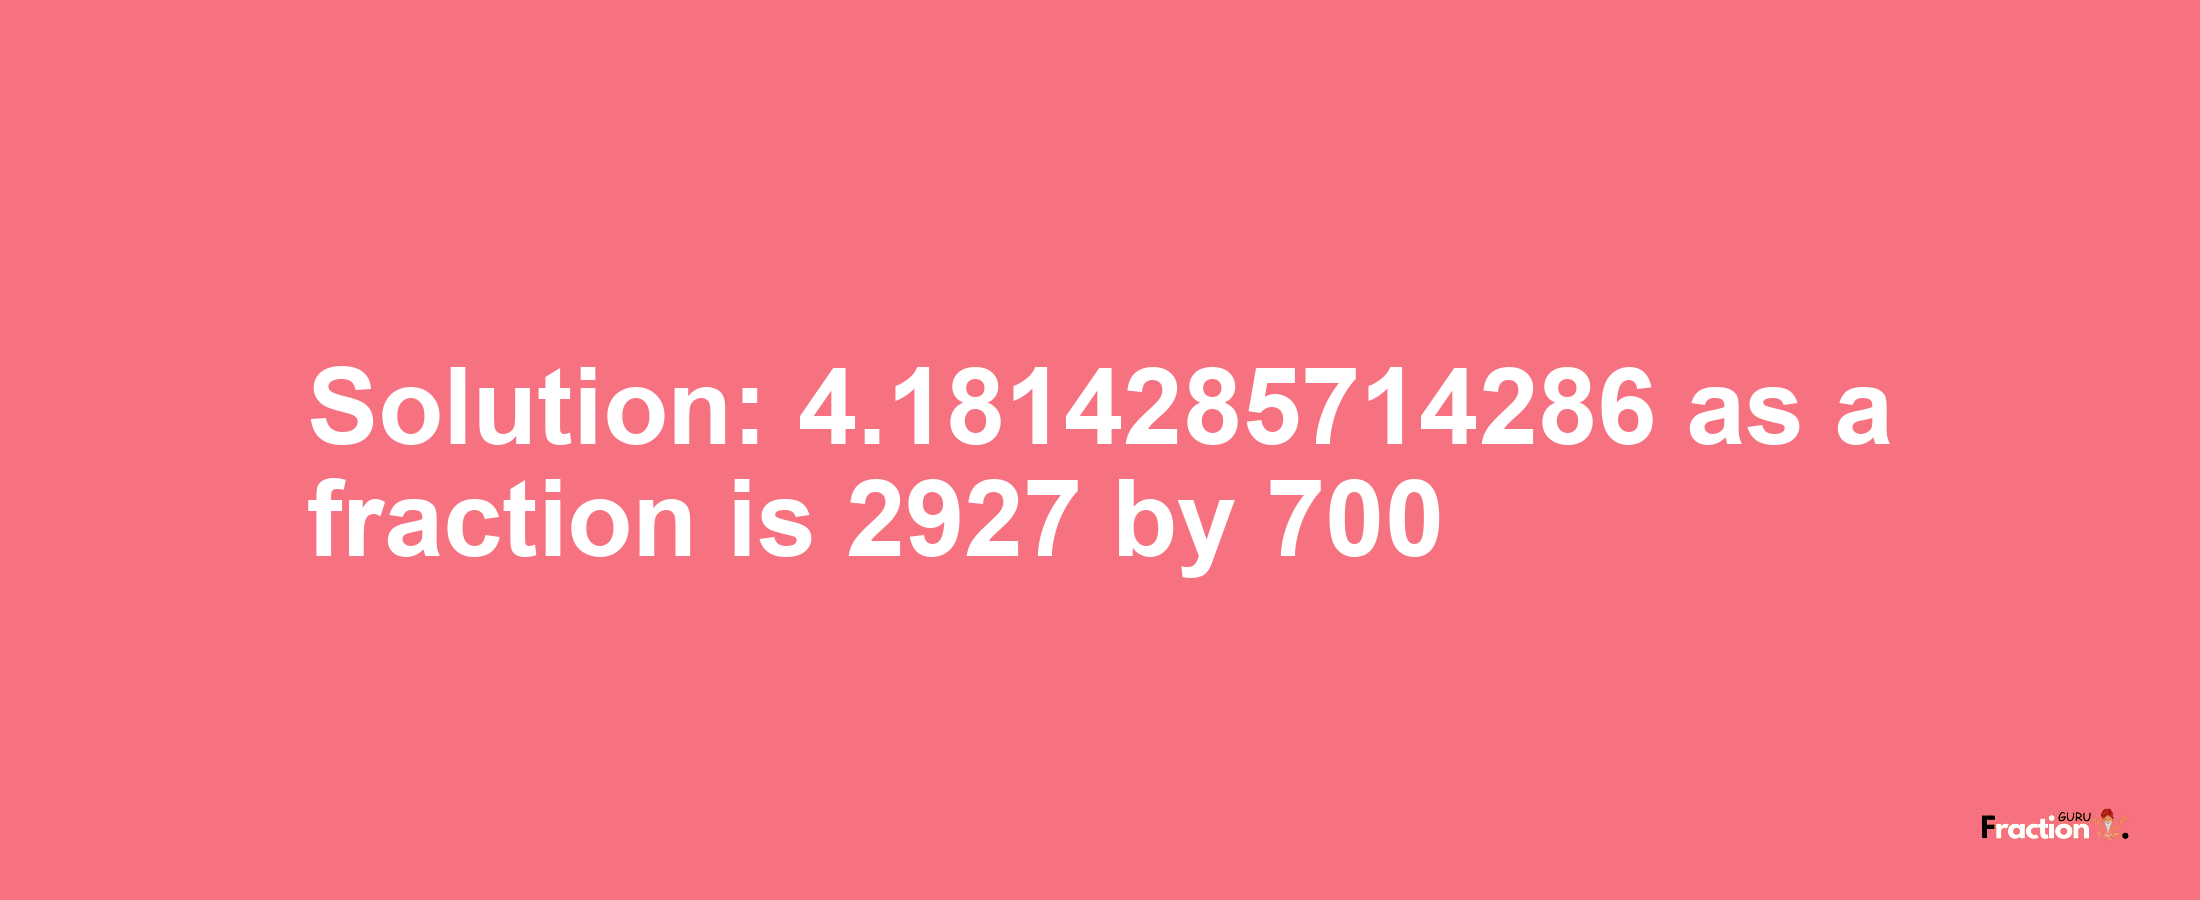 Solution:4.1814285714286 as a fraction is 2927/700